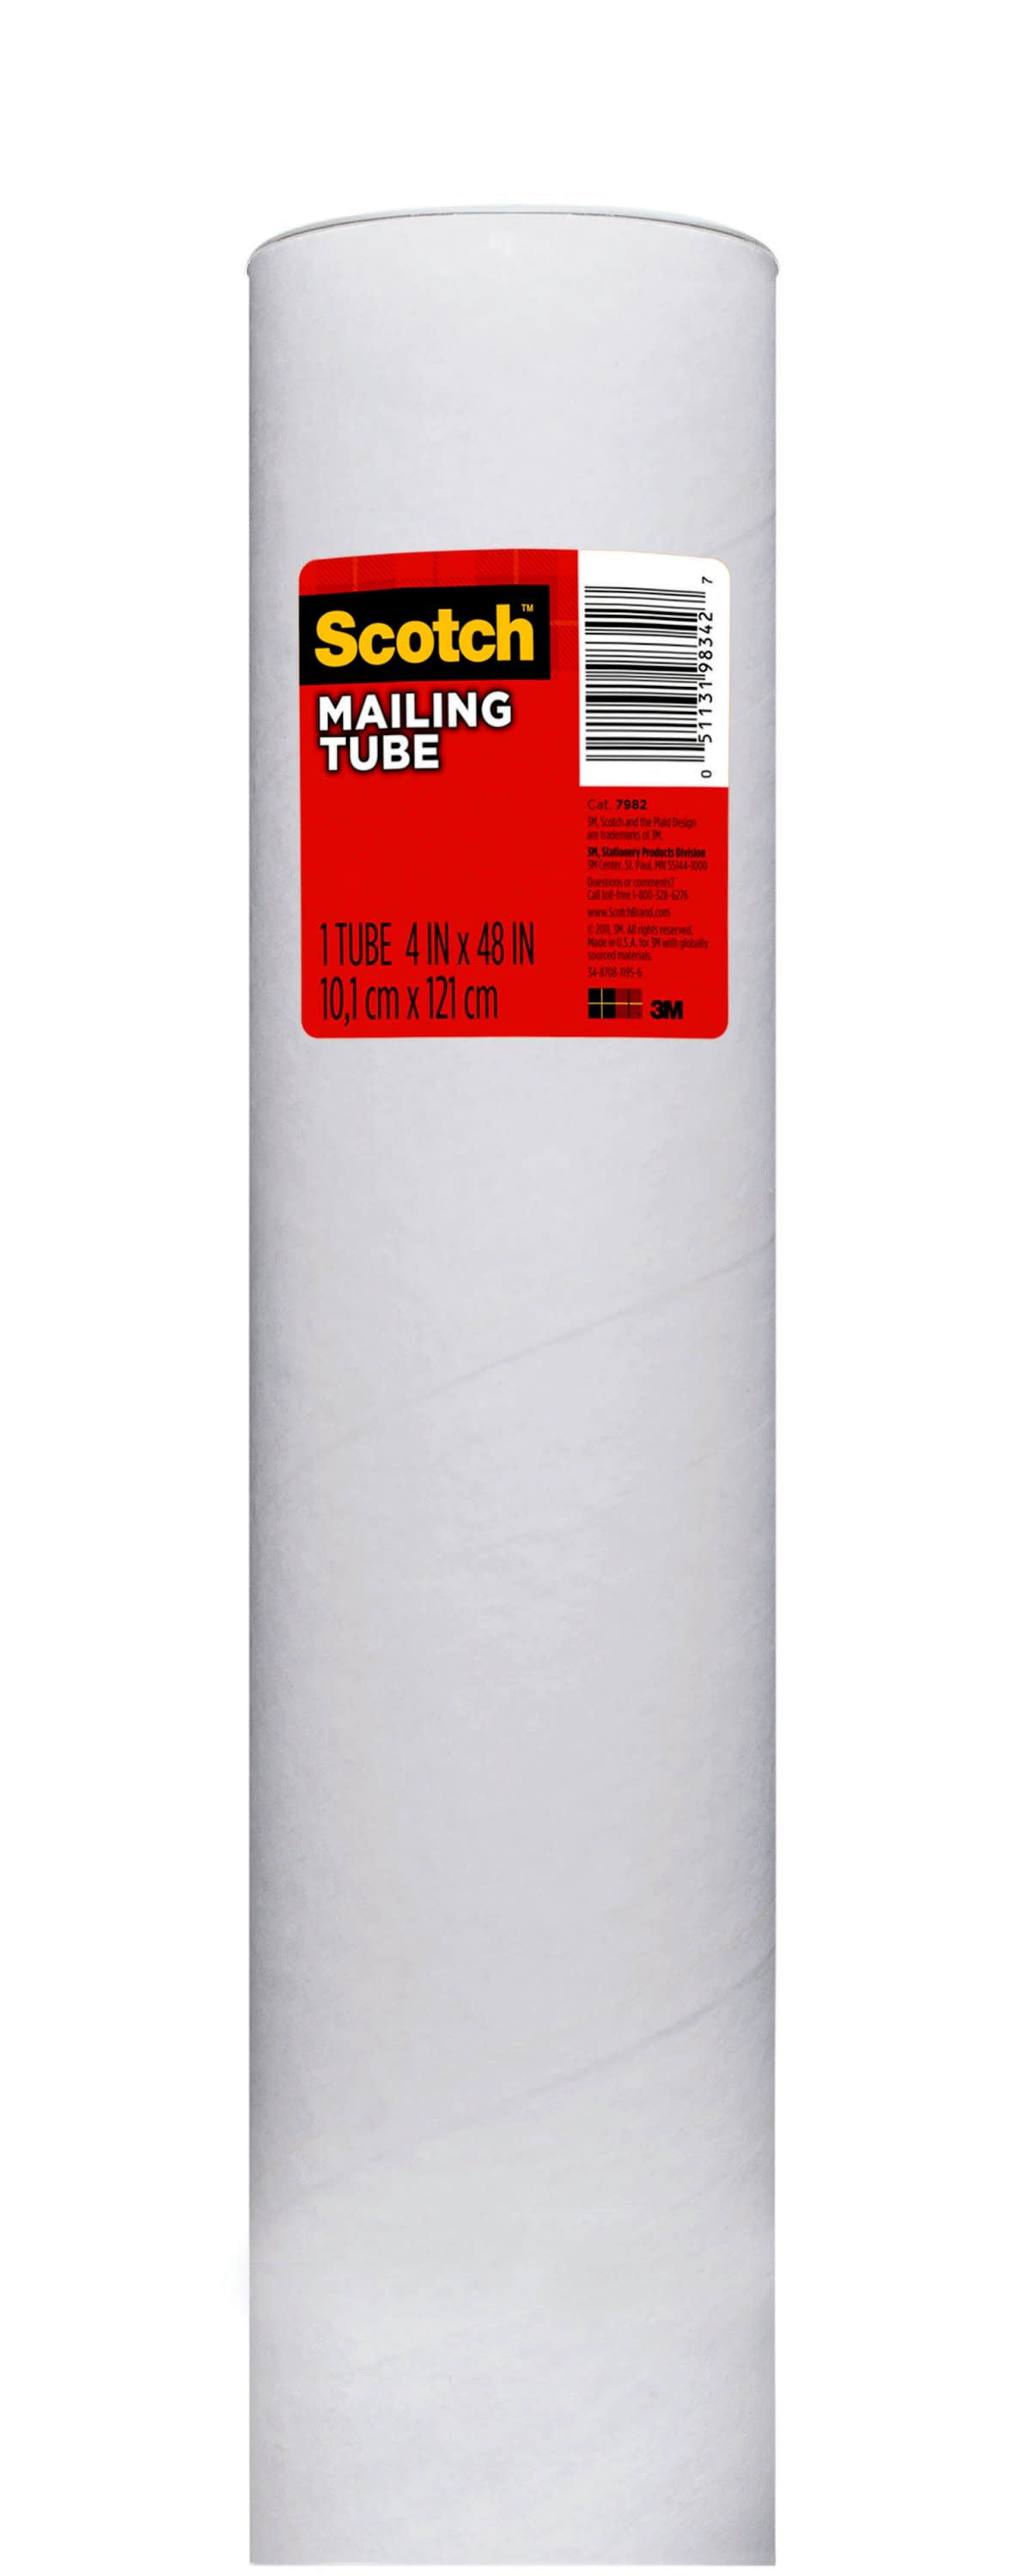 Durable 4 x 30 Mailing Tube - White: Ideal for Poster Storage